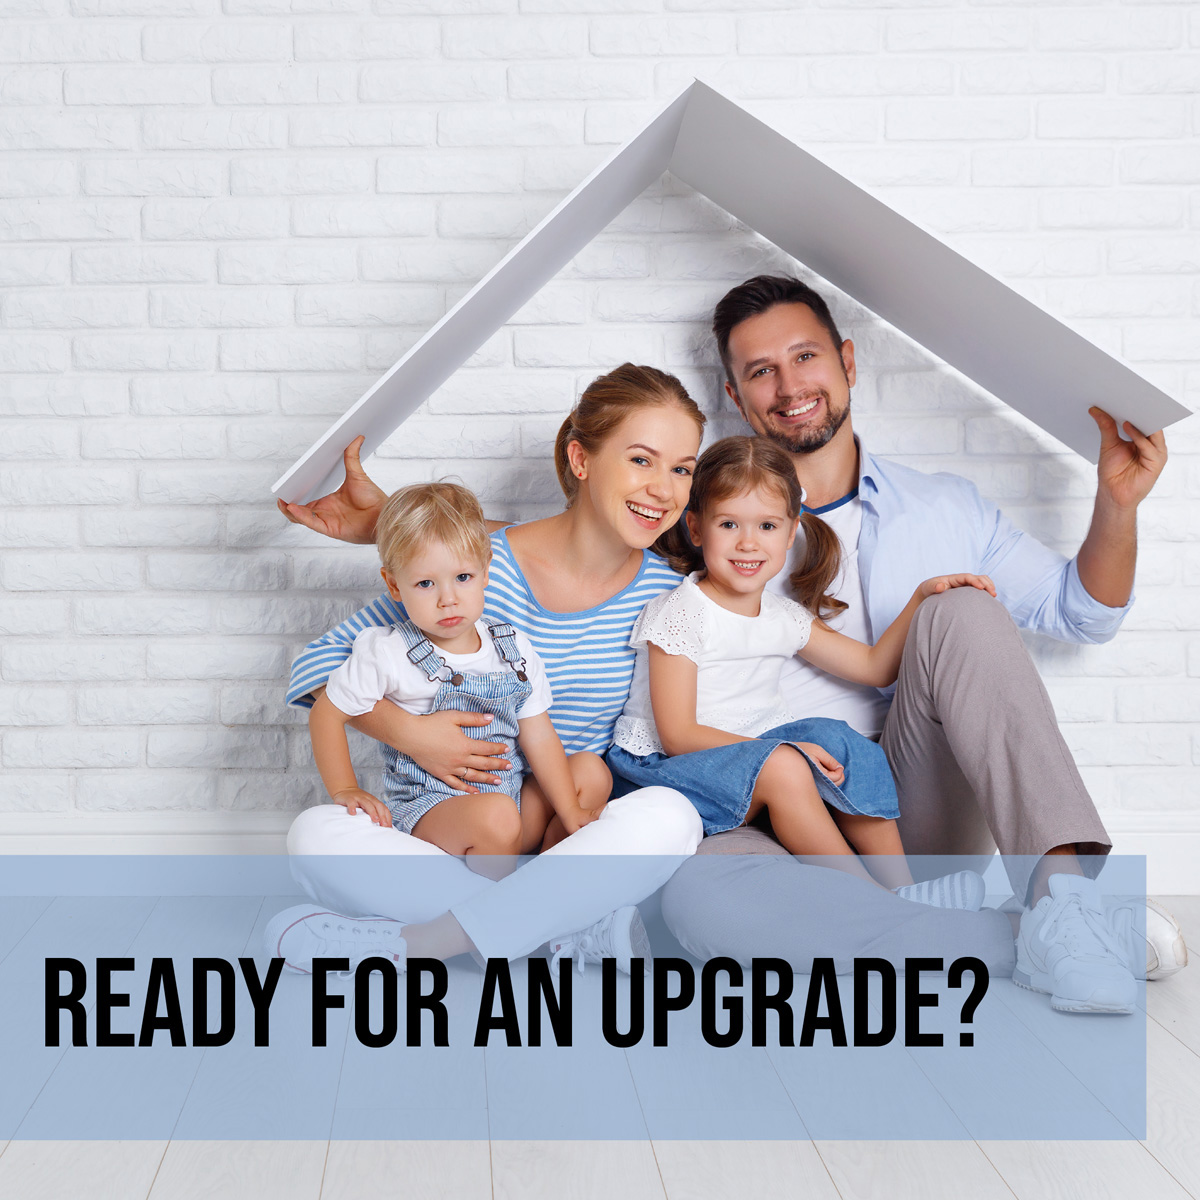 Your family keeps growing, but your apartment doesn't. It could be time to make the switch to a home of your own. Give Ted a call today at 908-722-9217 to discuss your mortgage options! #njmortgage #nymortgage #njrealtor #nyrealtor